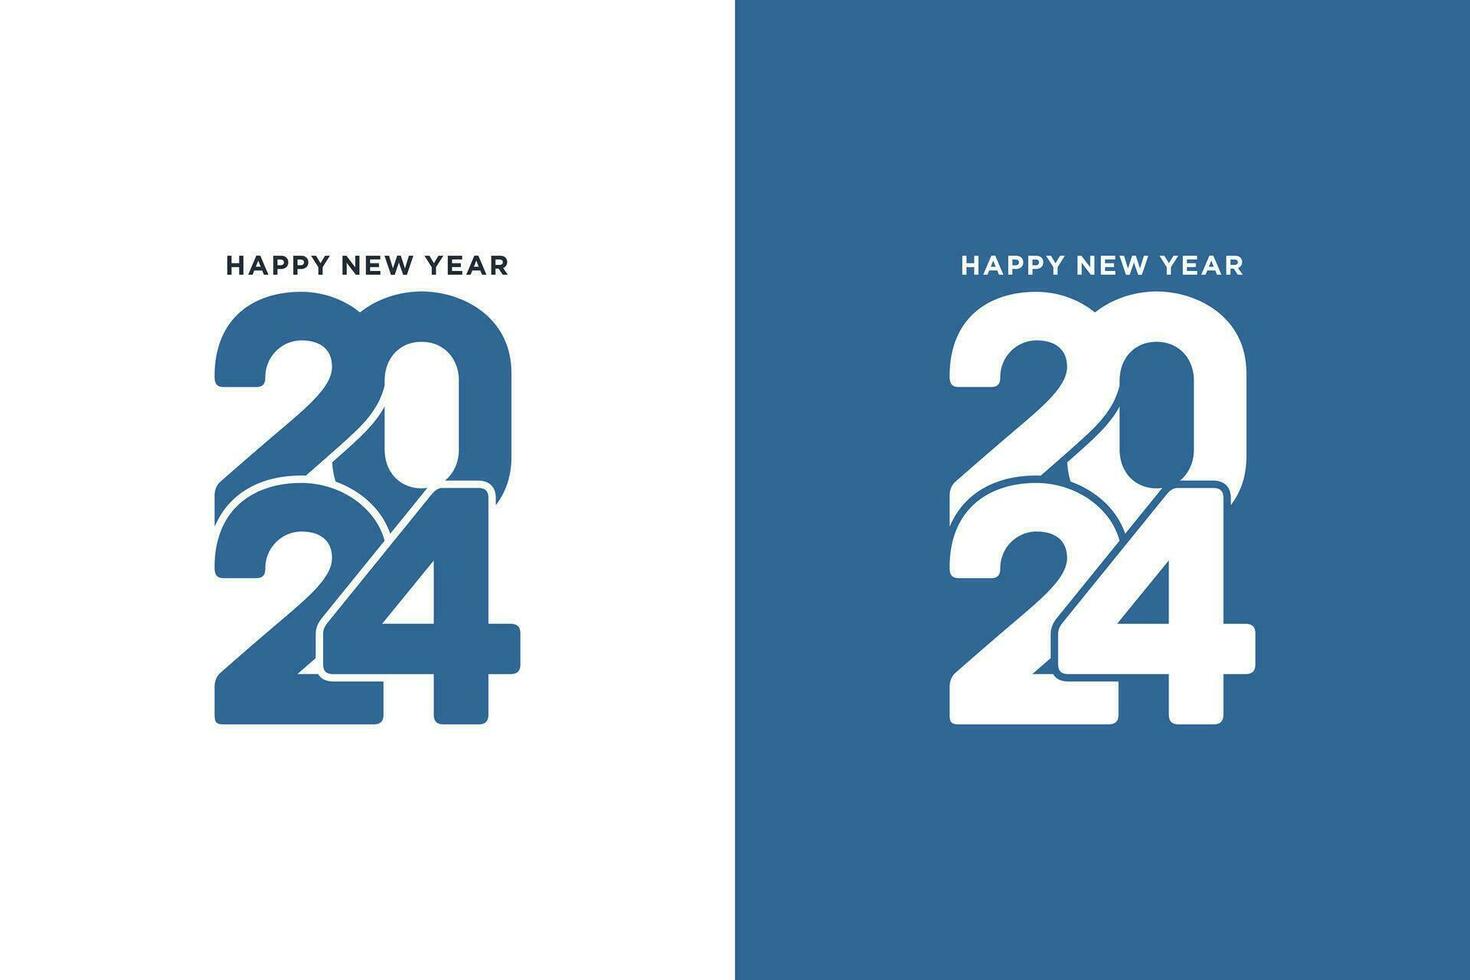 happy new year 2024 greetings, with the numbers 2024 overlapping each other vector